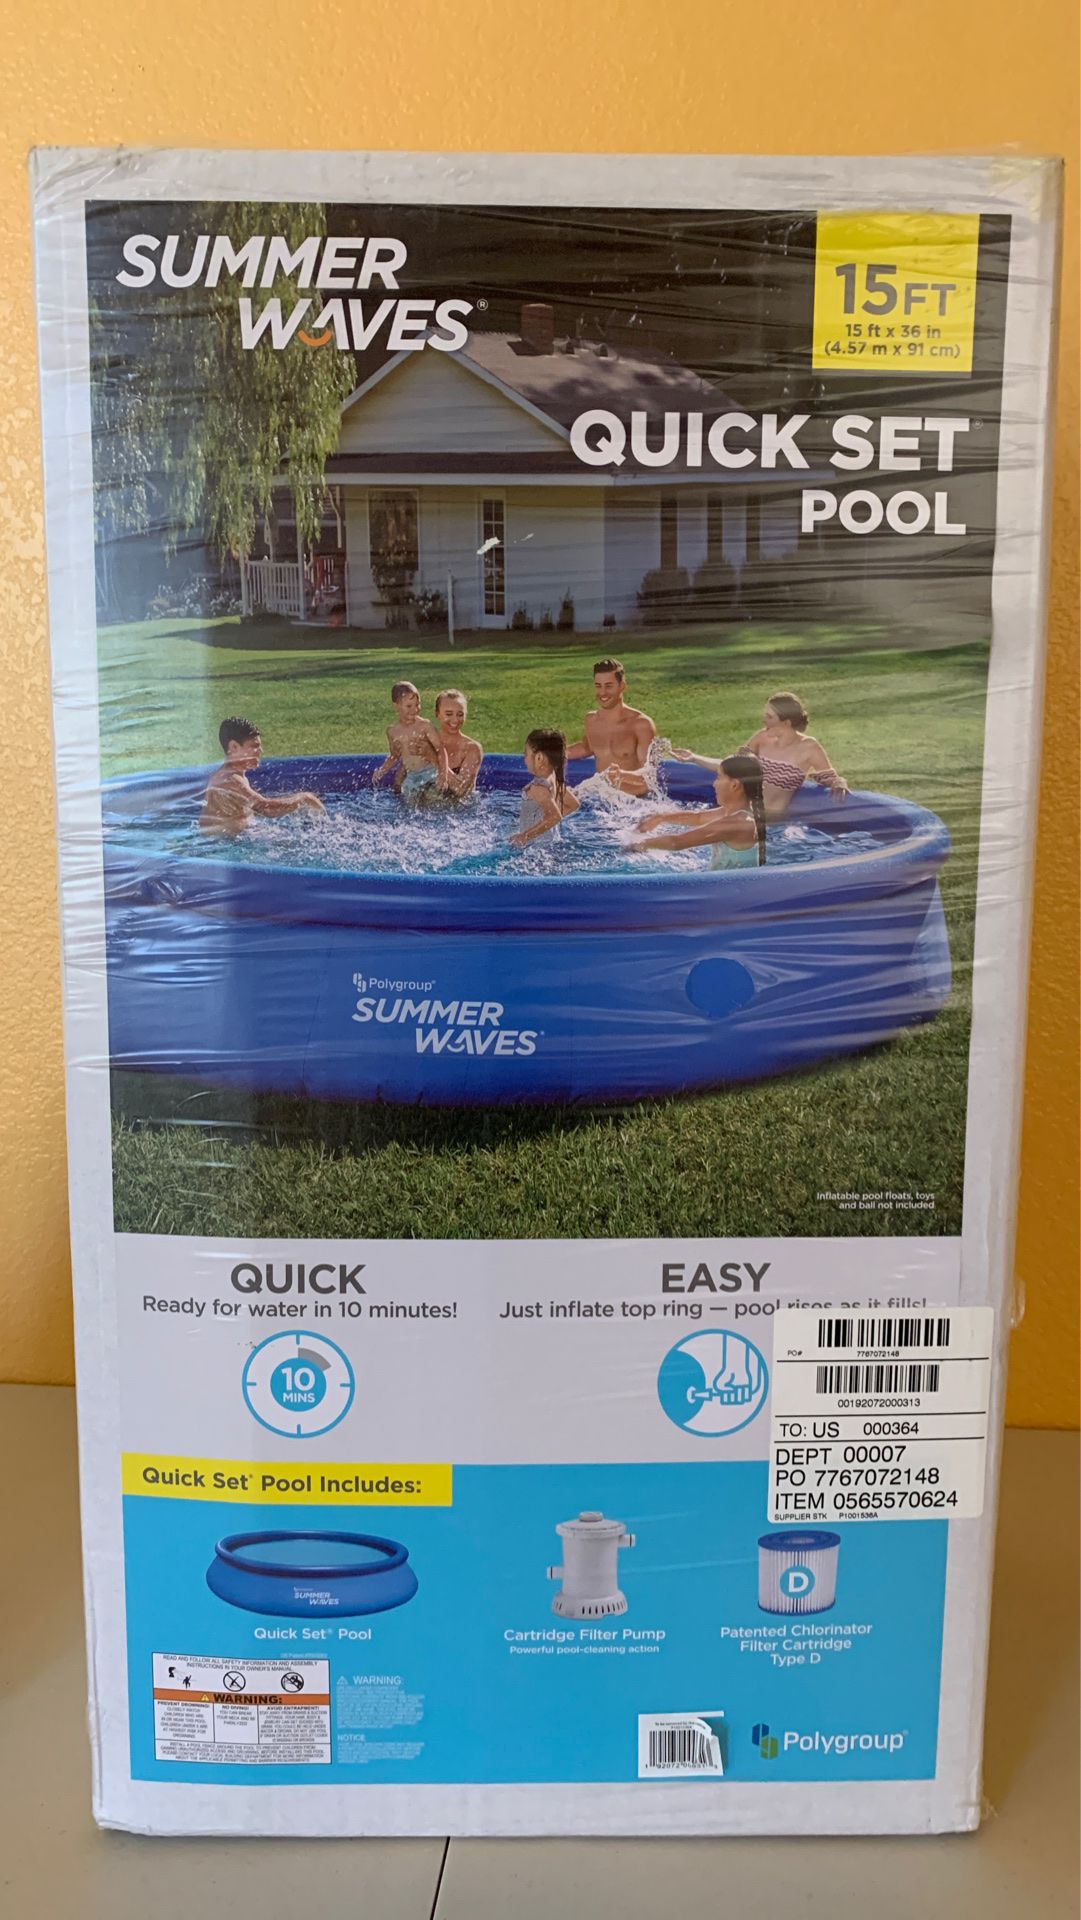 Brand New 15 Ft Summer Waves Quick Set Pool